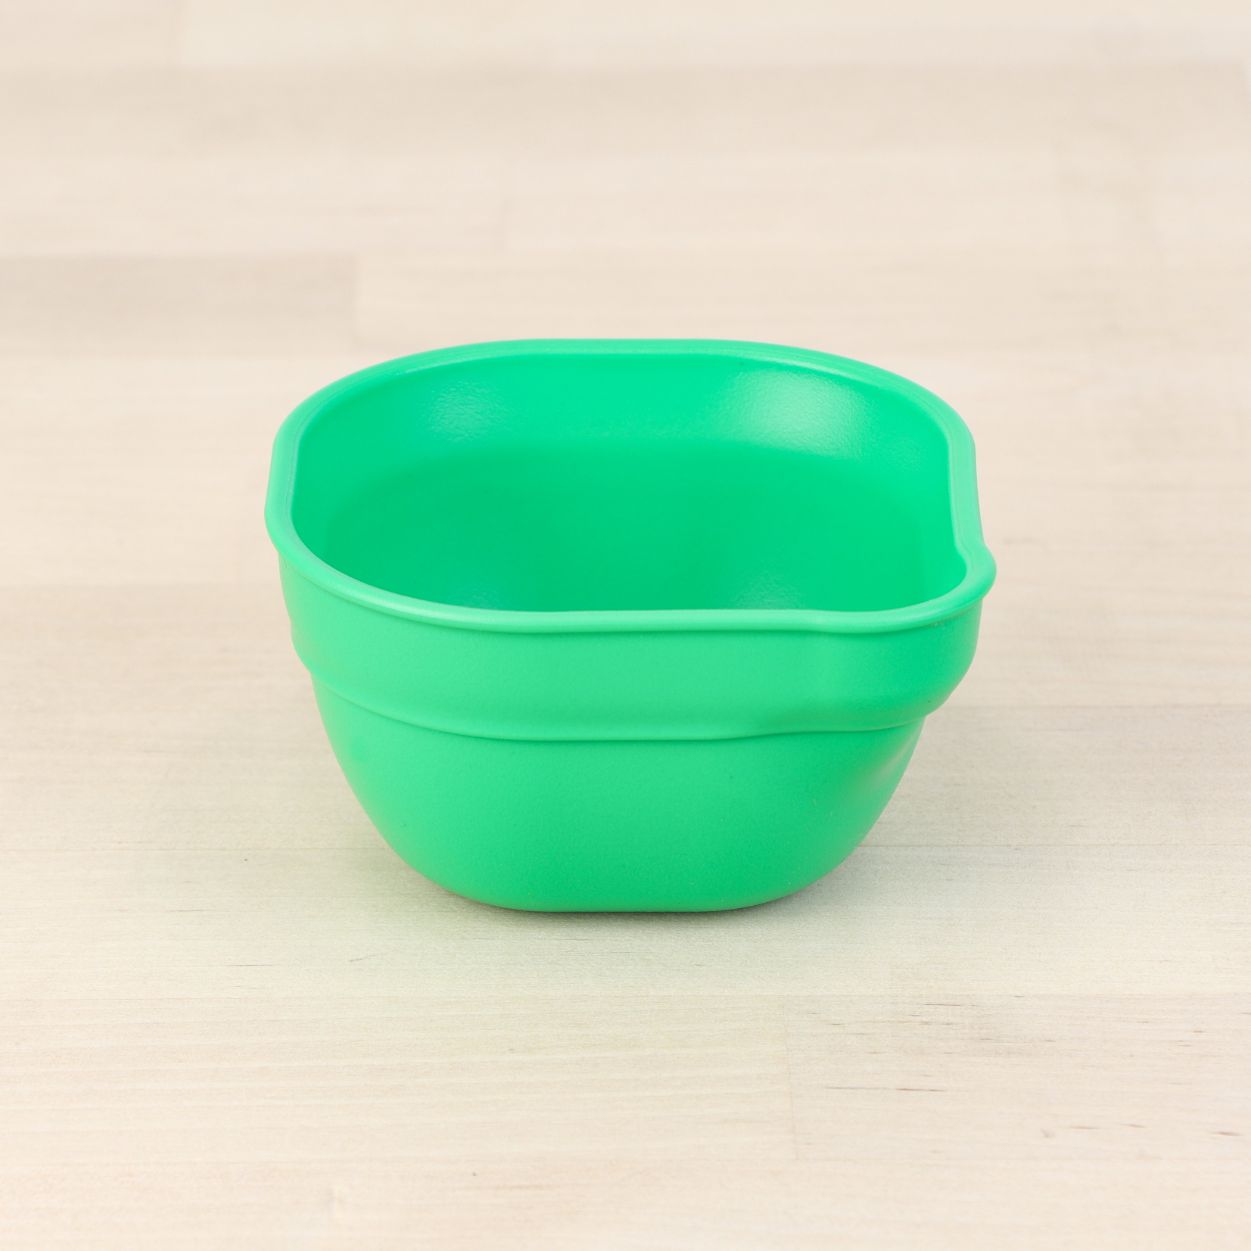 kelly green replay dip and pour bowls made out of recycled plastic - Mikki and Me Kids